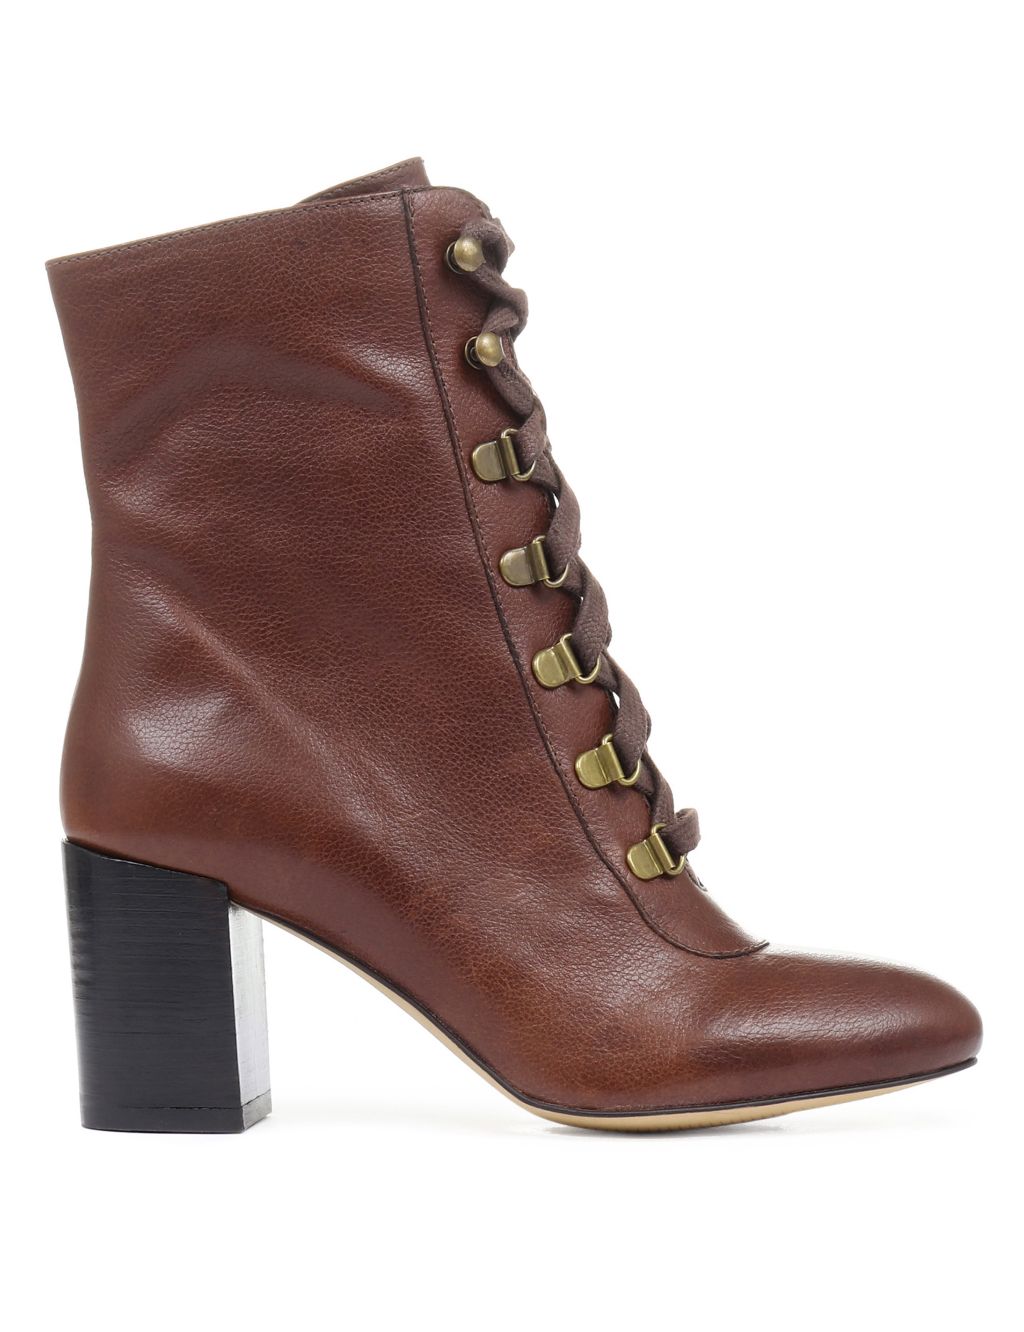 Leather Lace-Up Block Heel Ankle Boots image 5